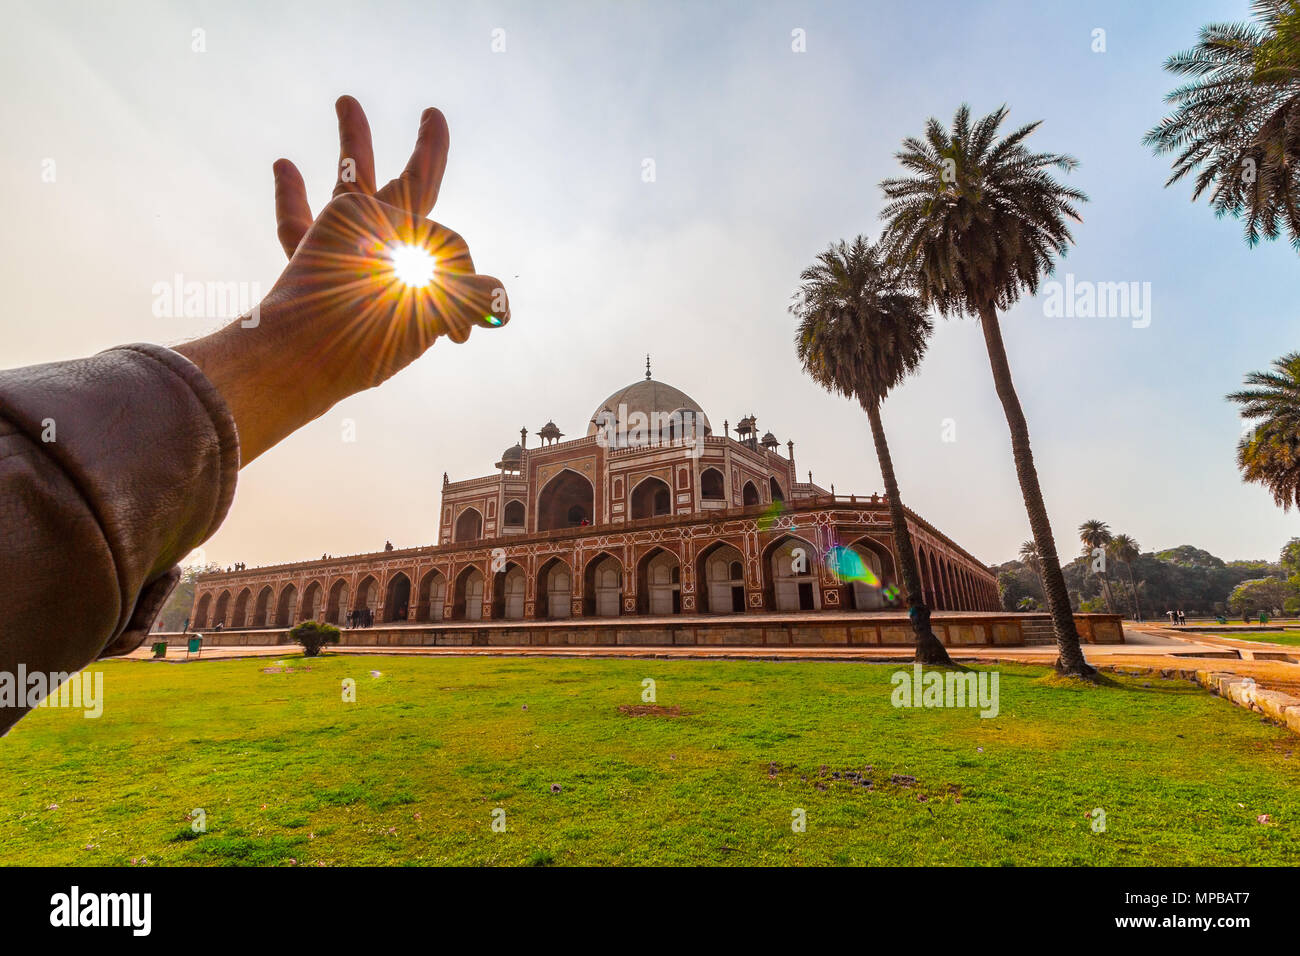 Panoramic views of the first garden-tomb on the Indian subcontinent. The Humayun's Tomb is an excellent example of Persian architecture. Stock Photo